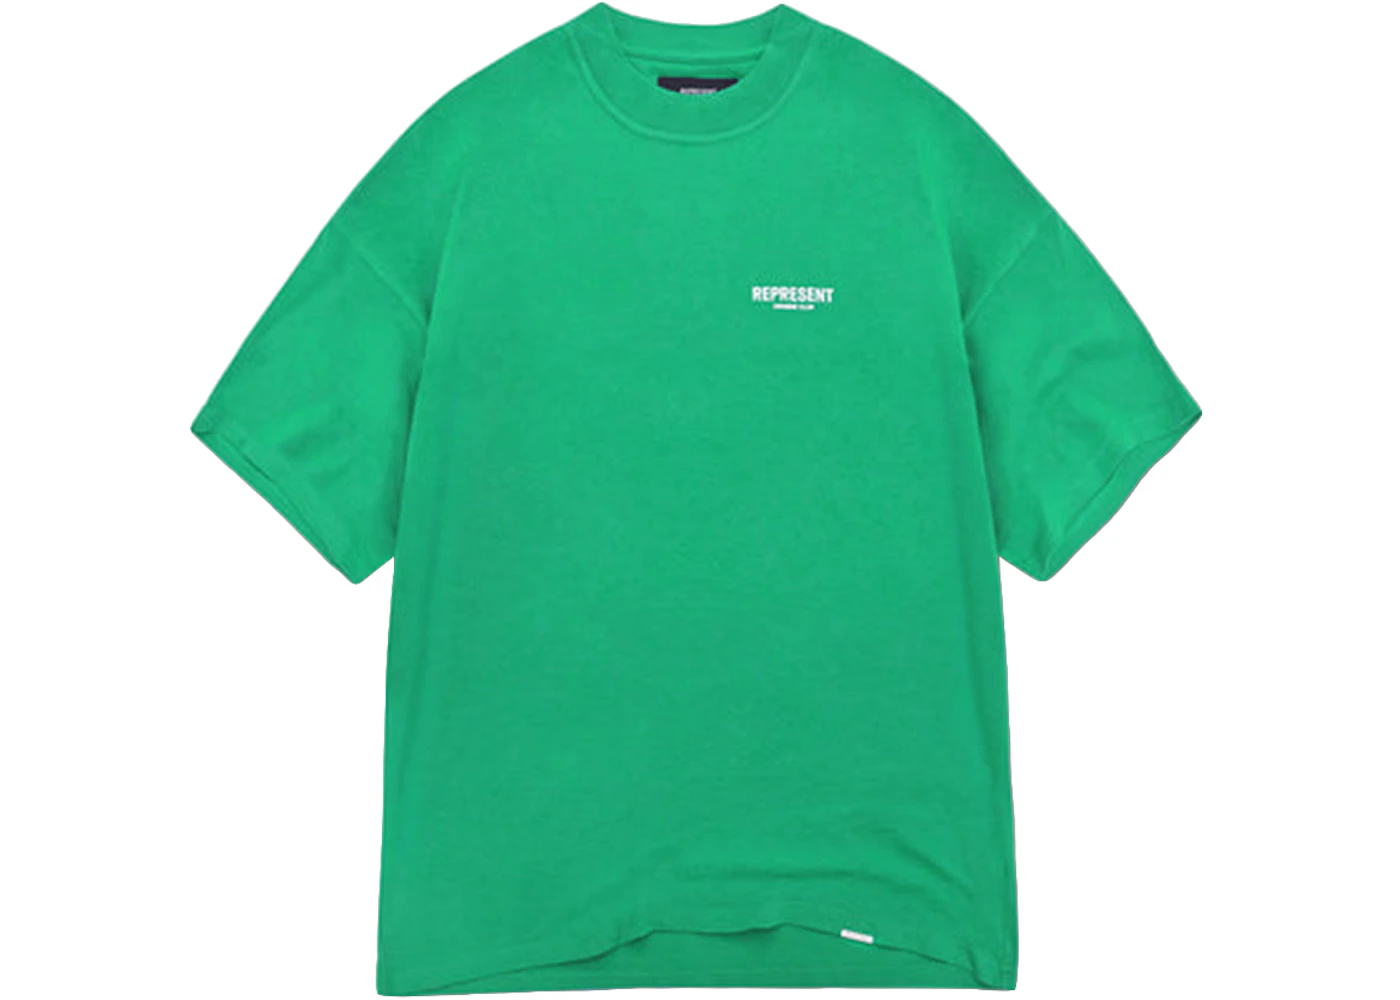 Represent Owners Club T-Shirt Island Green - SS23 - US